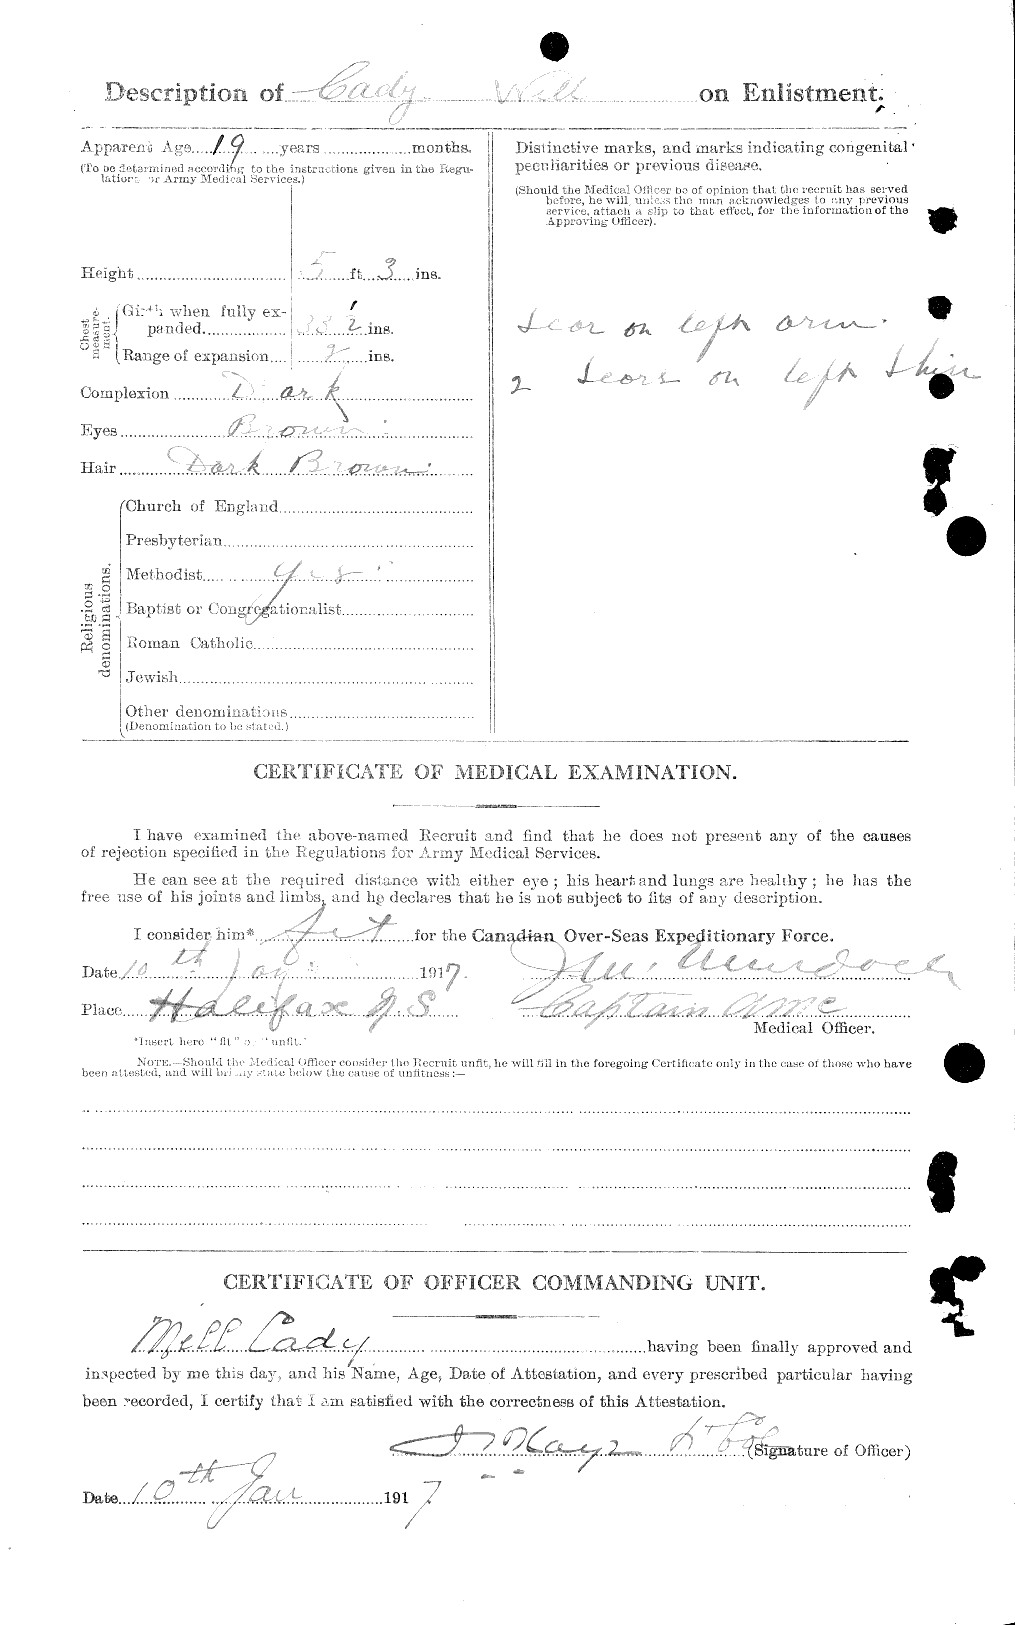 Personnel Records of the First World War - CEF 000178b